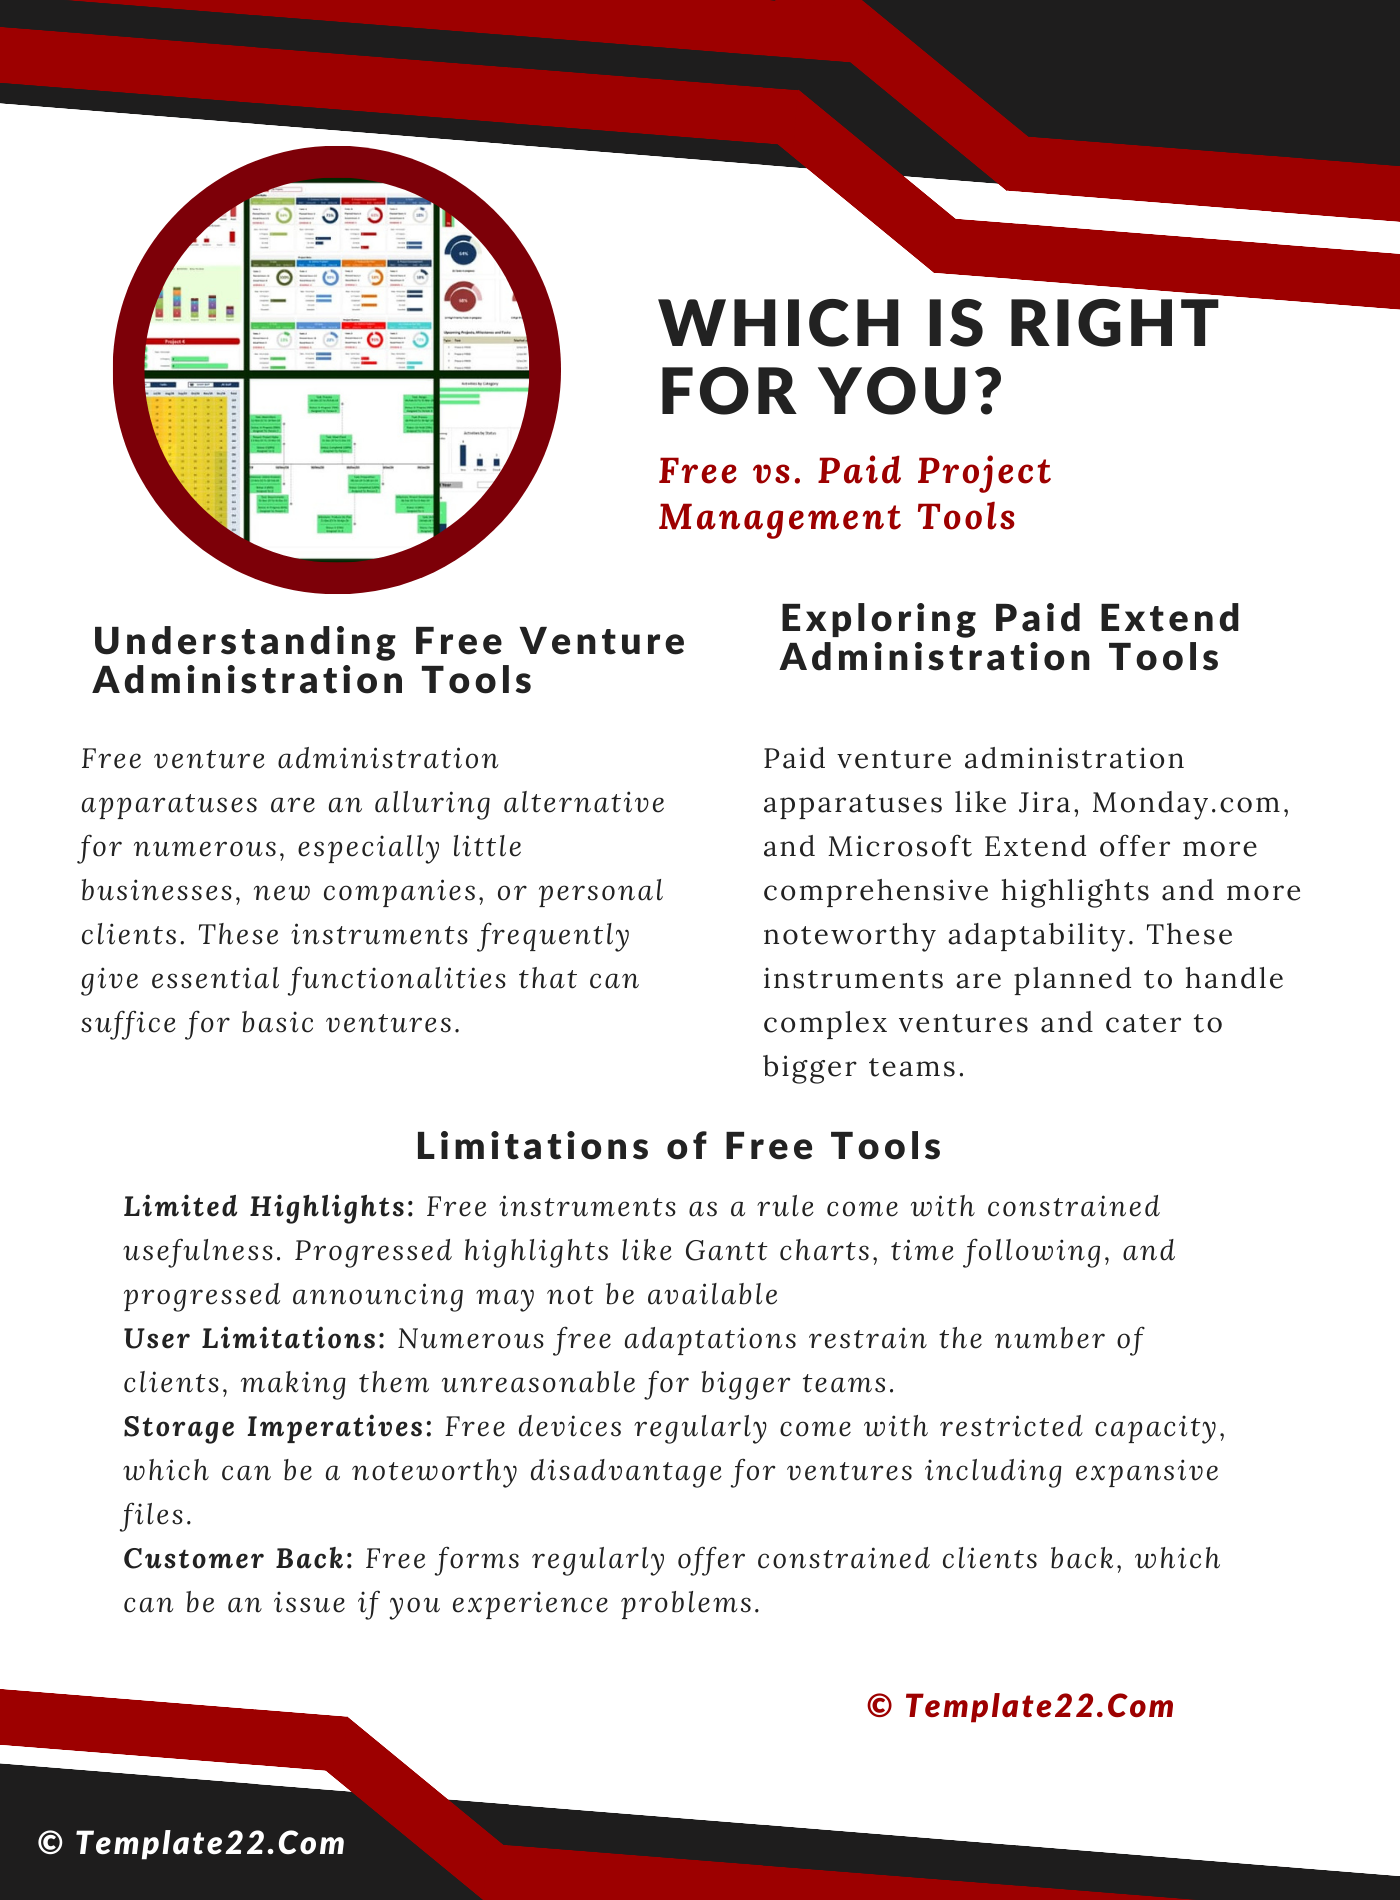 Free vs. Paid Project Management Tools: Which Is Right for You?